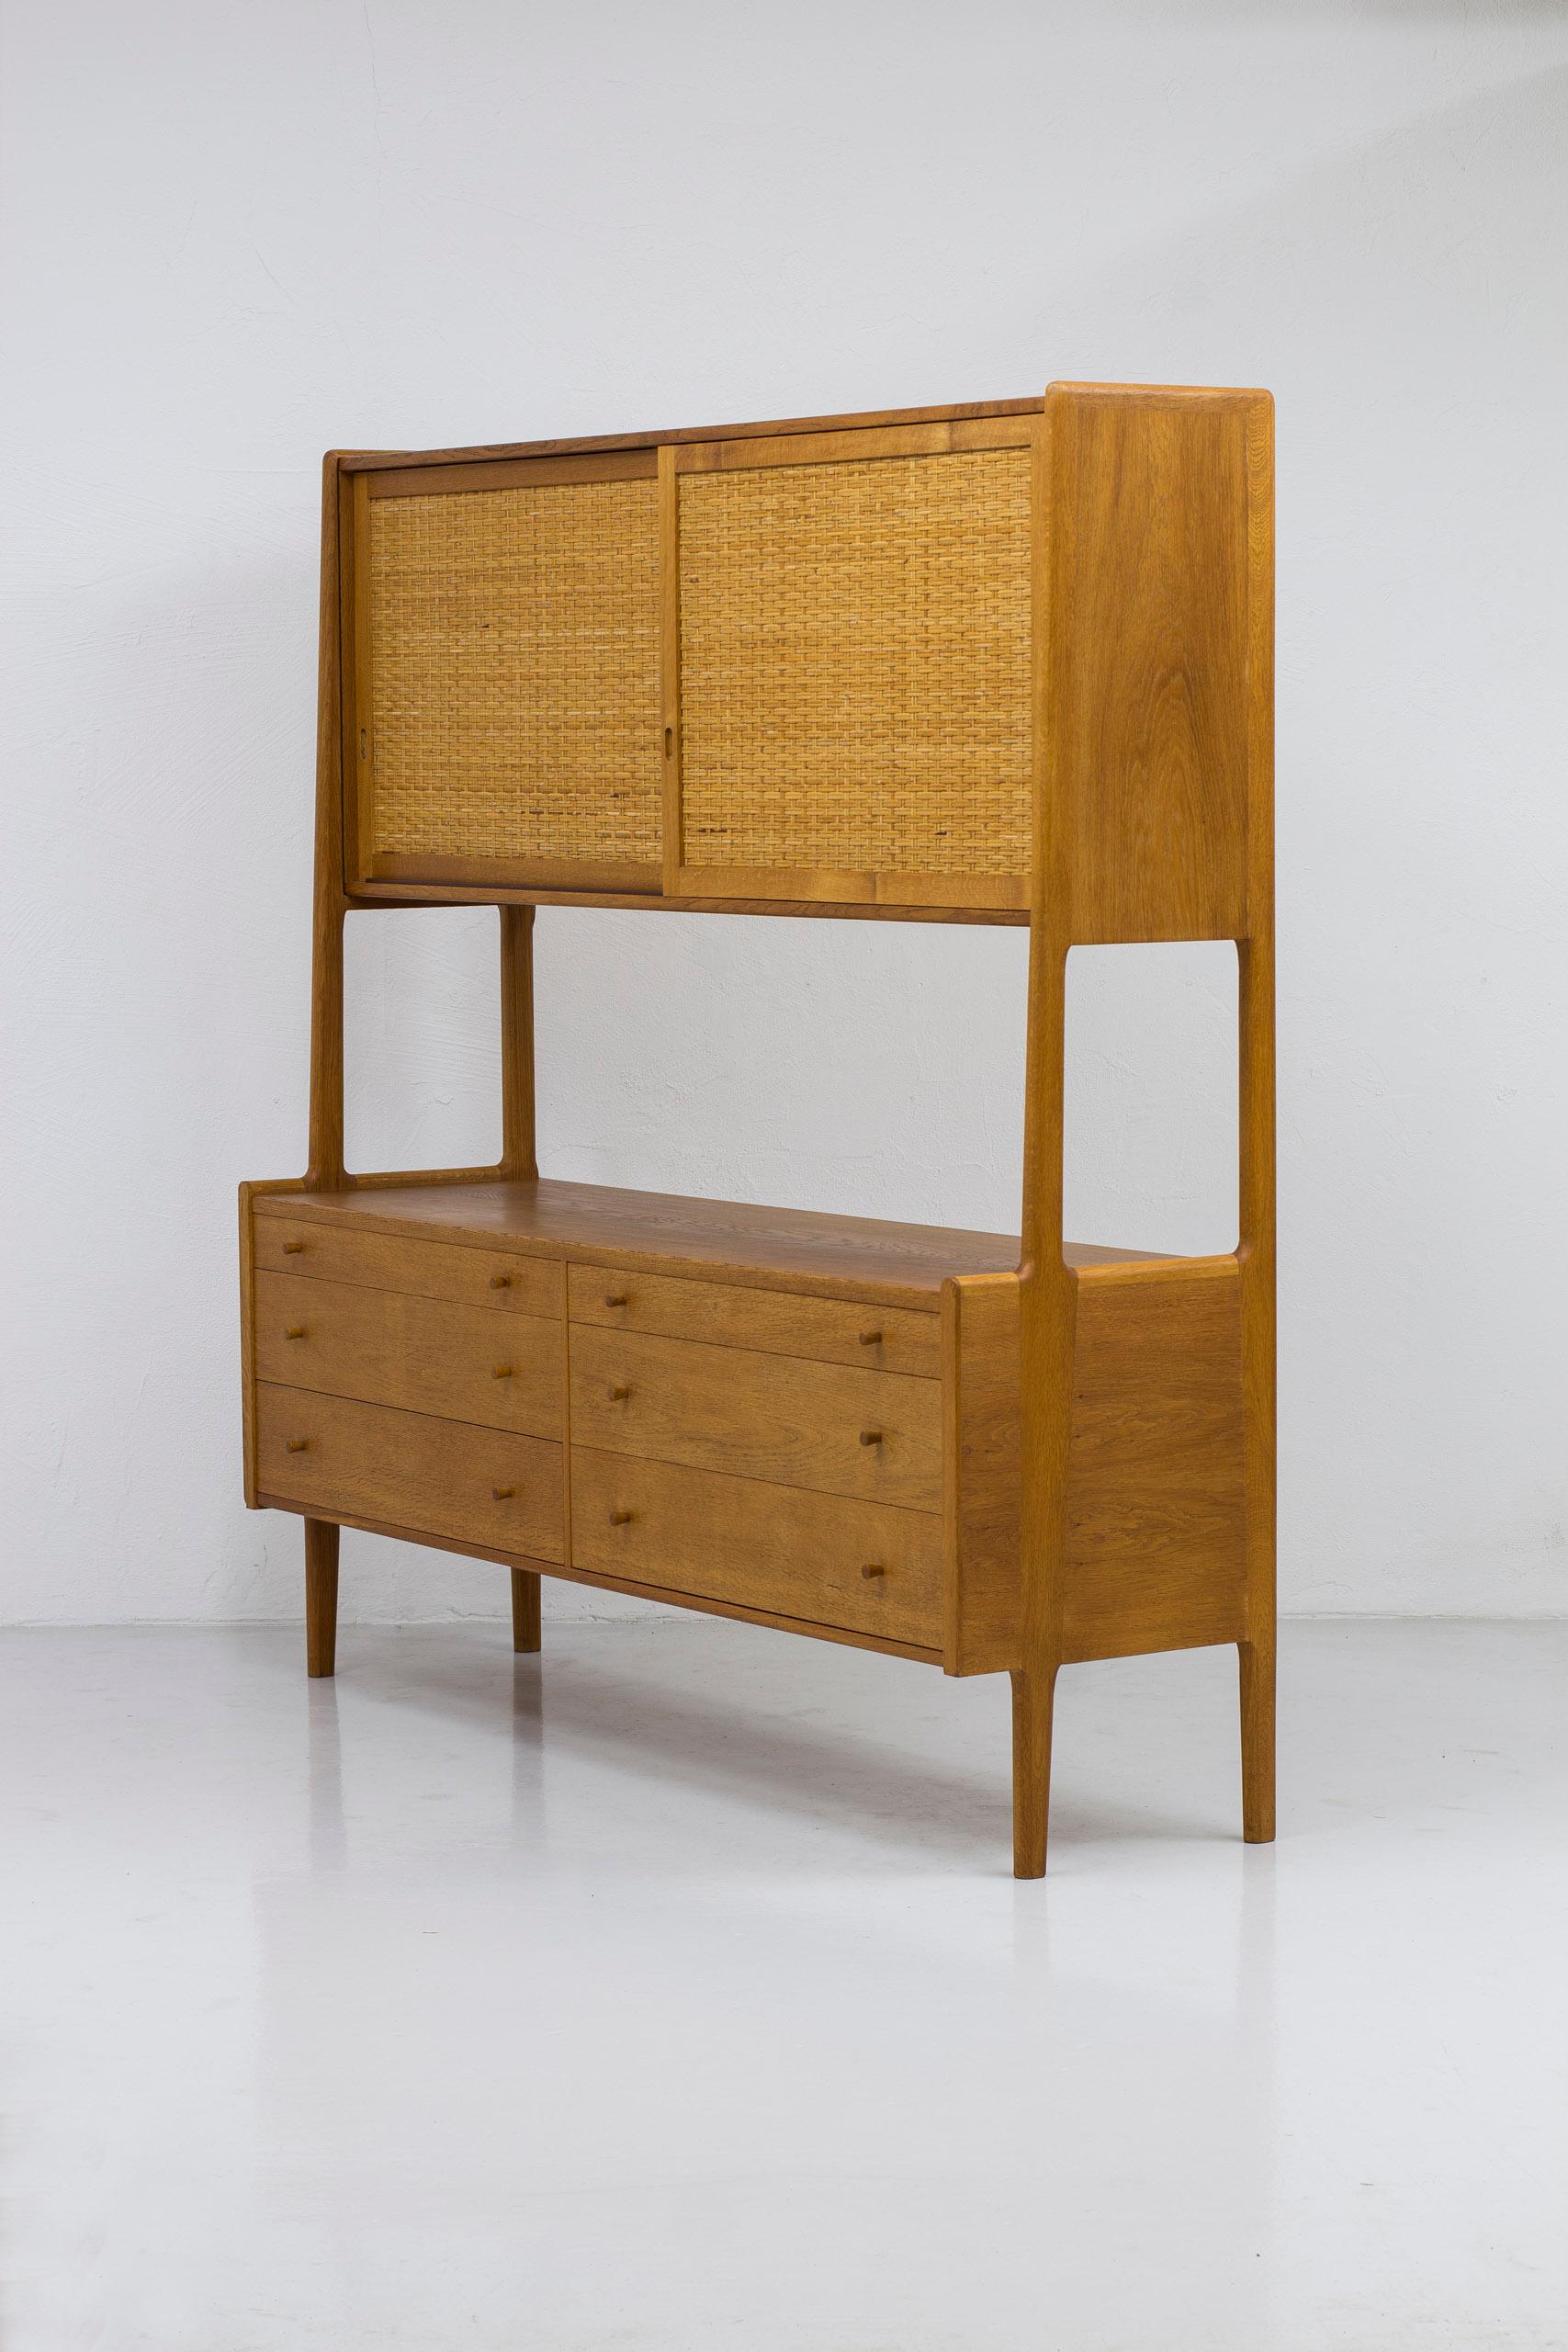 High board or double cabinet model RY20 designed by Hans J. Wegner. Produced in Denmark by RY Møbler, this example stamped February 1962. Made rom oak with contrasting cane on the upper sliding doors. Inside of the cabinet in light maple. Nice